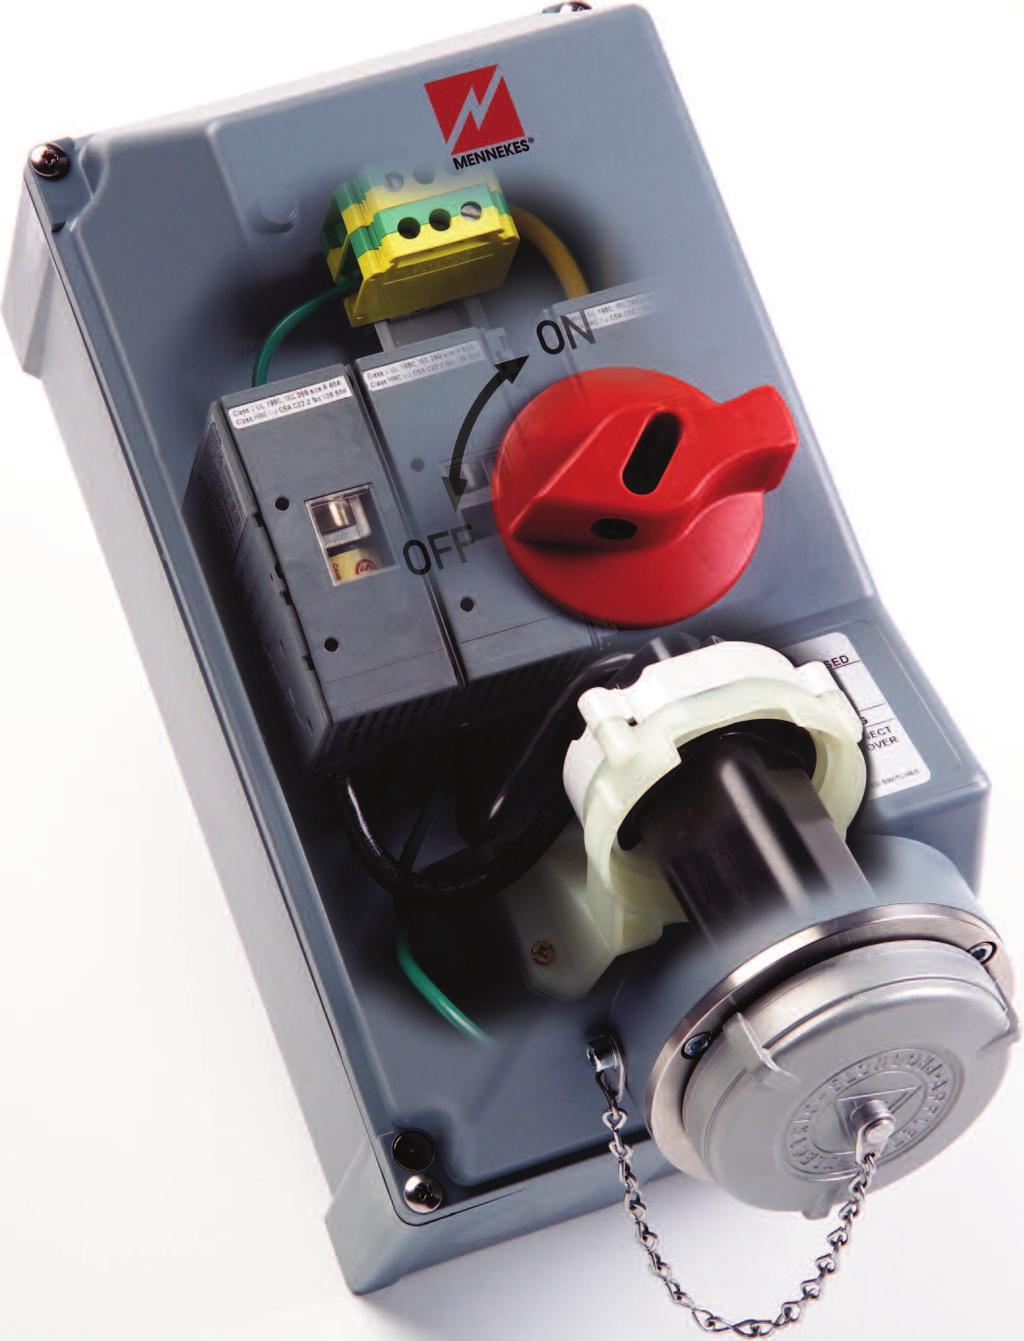 MSR Series Switched and Interlocked Receptacles 30 Amp and 60 Amp, Fusible and Non-Fusible Corner mounting tubes minimize mounting footprint. Moveable mounting feet also provided.